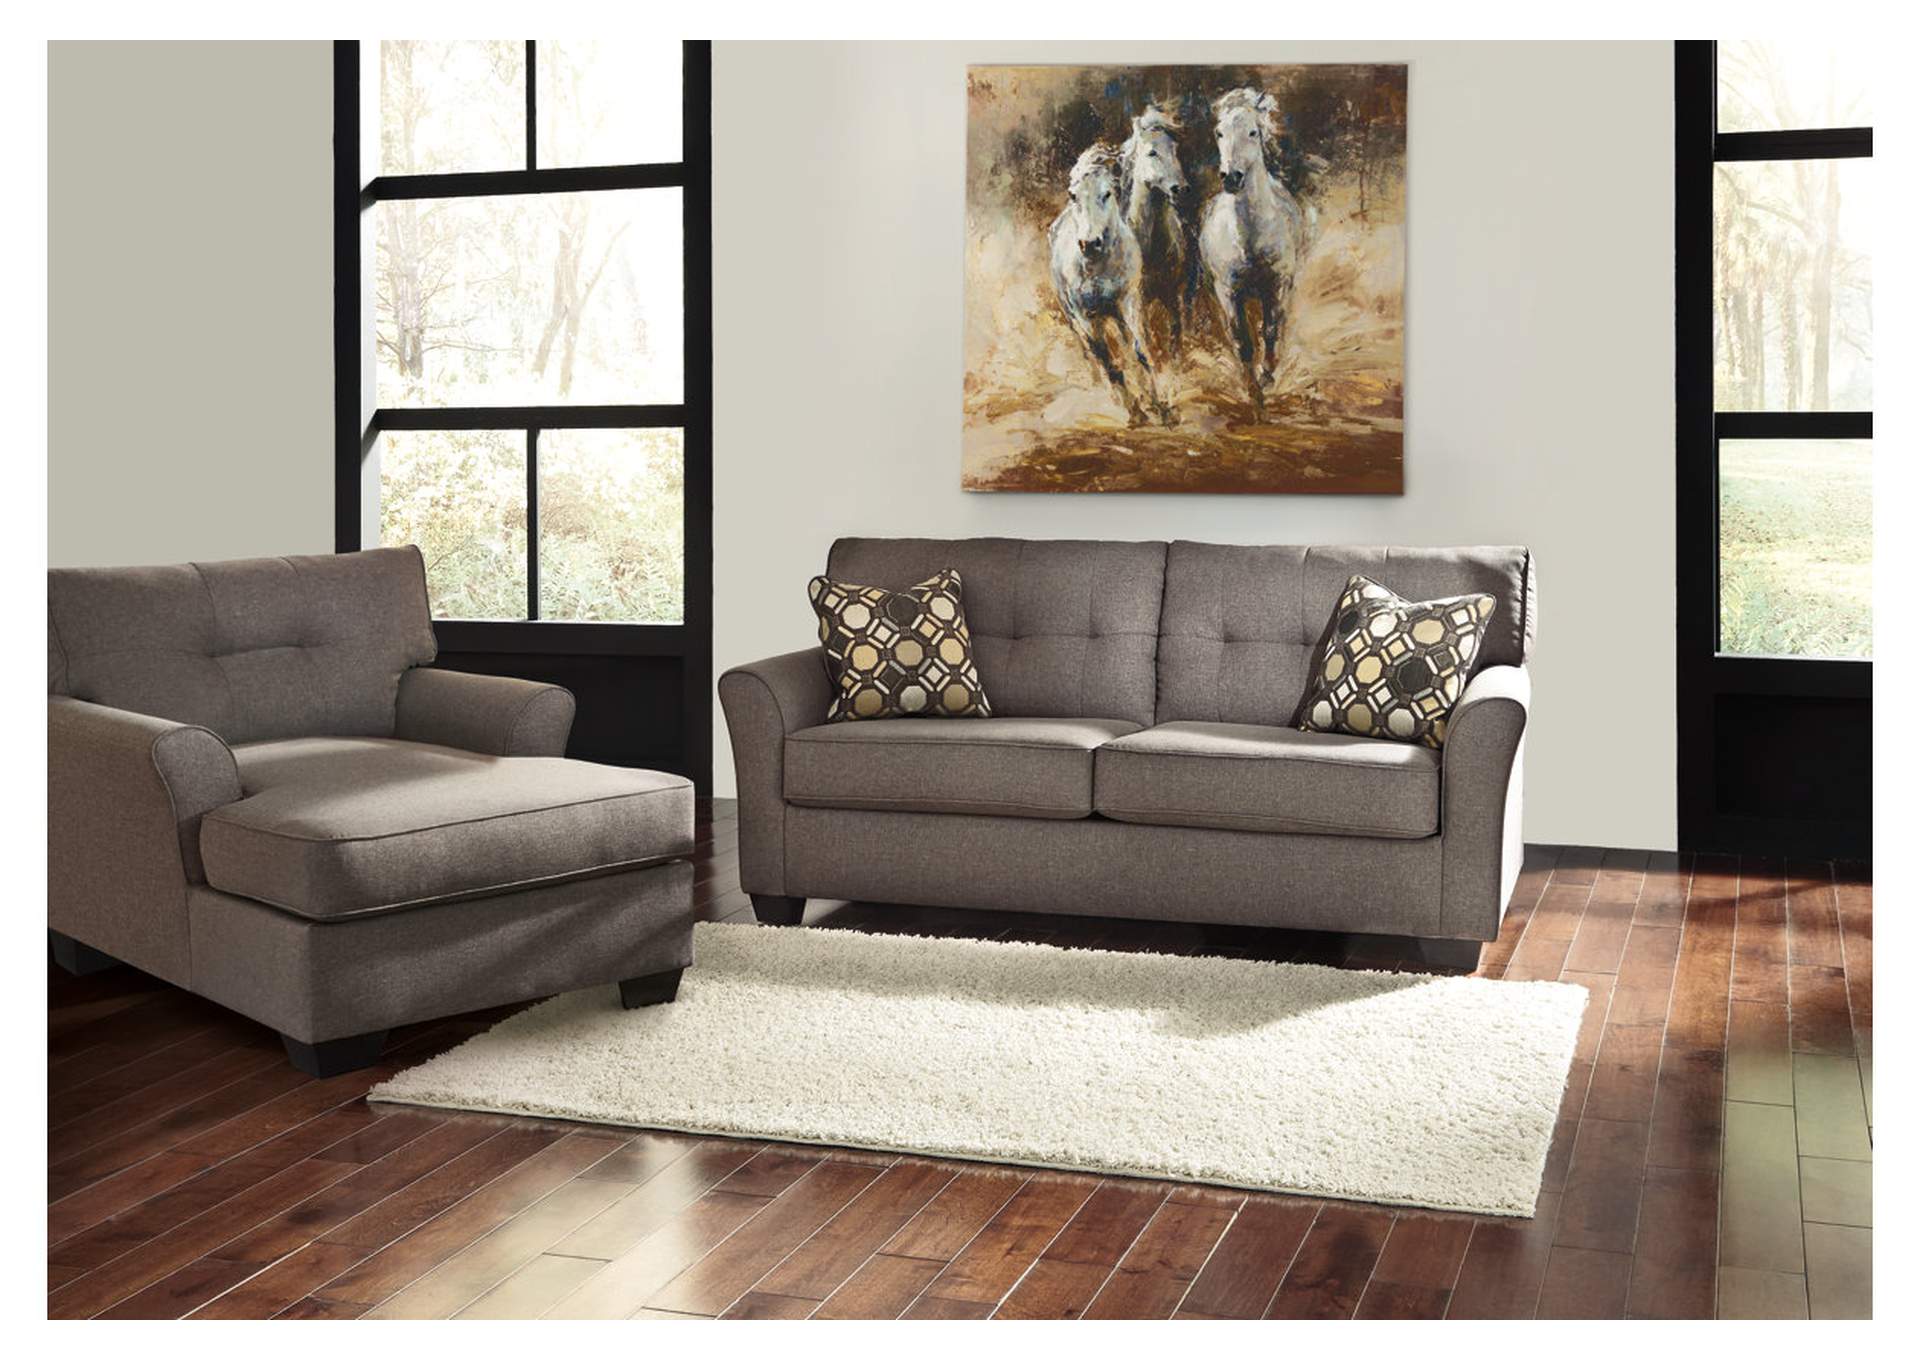 Tibbee Sofa and Chaise,Signature Design By Ashley